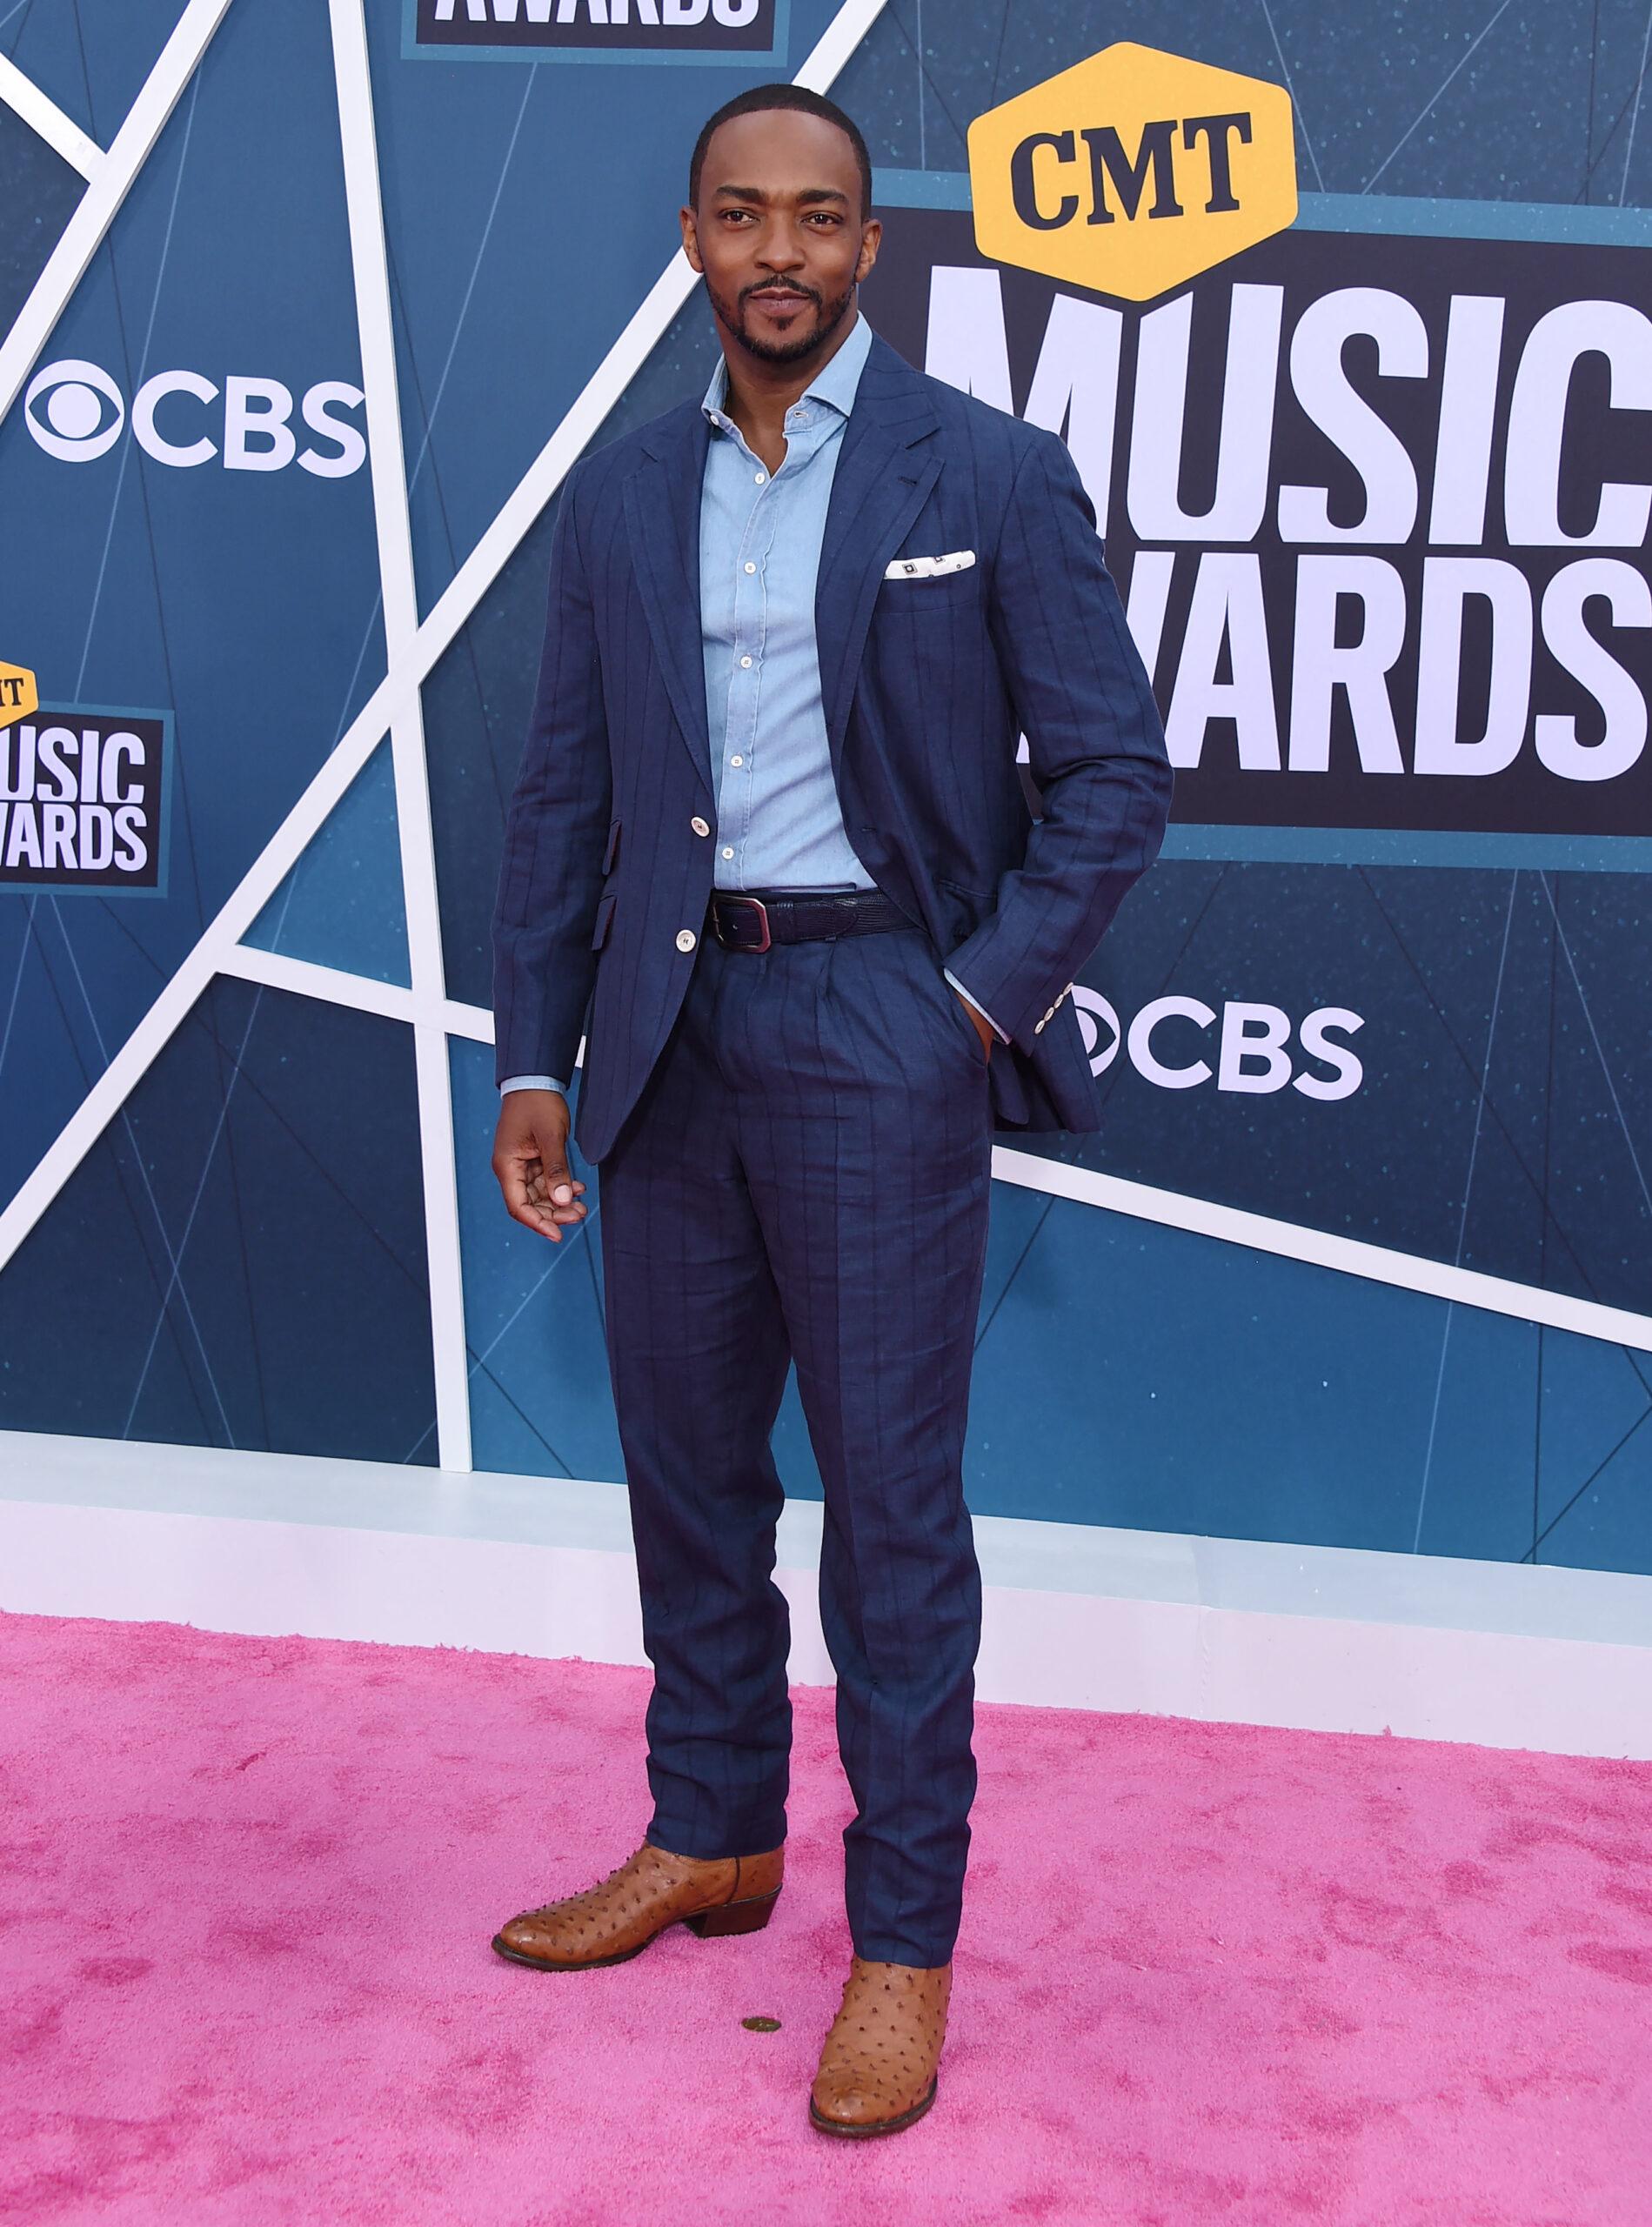 Anthony Mackie at the 2022 CMT Music Awards